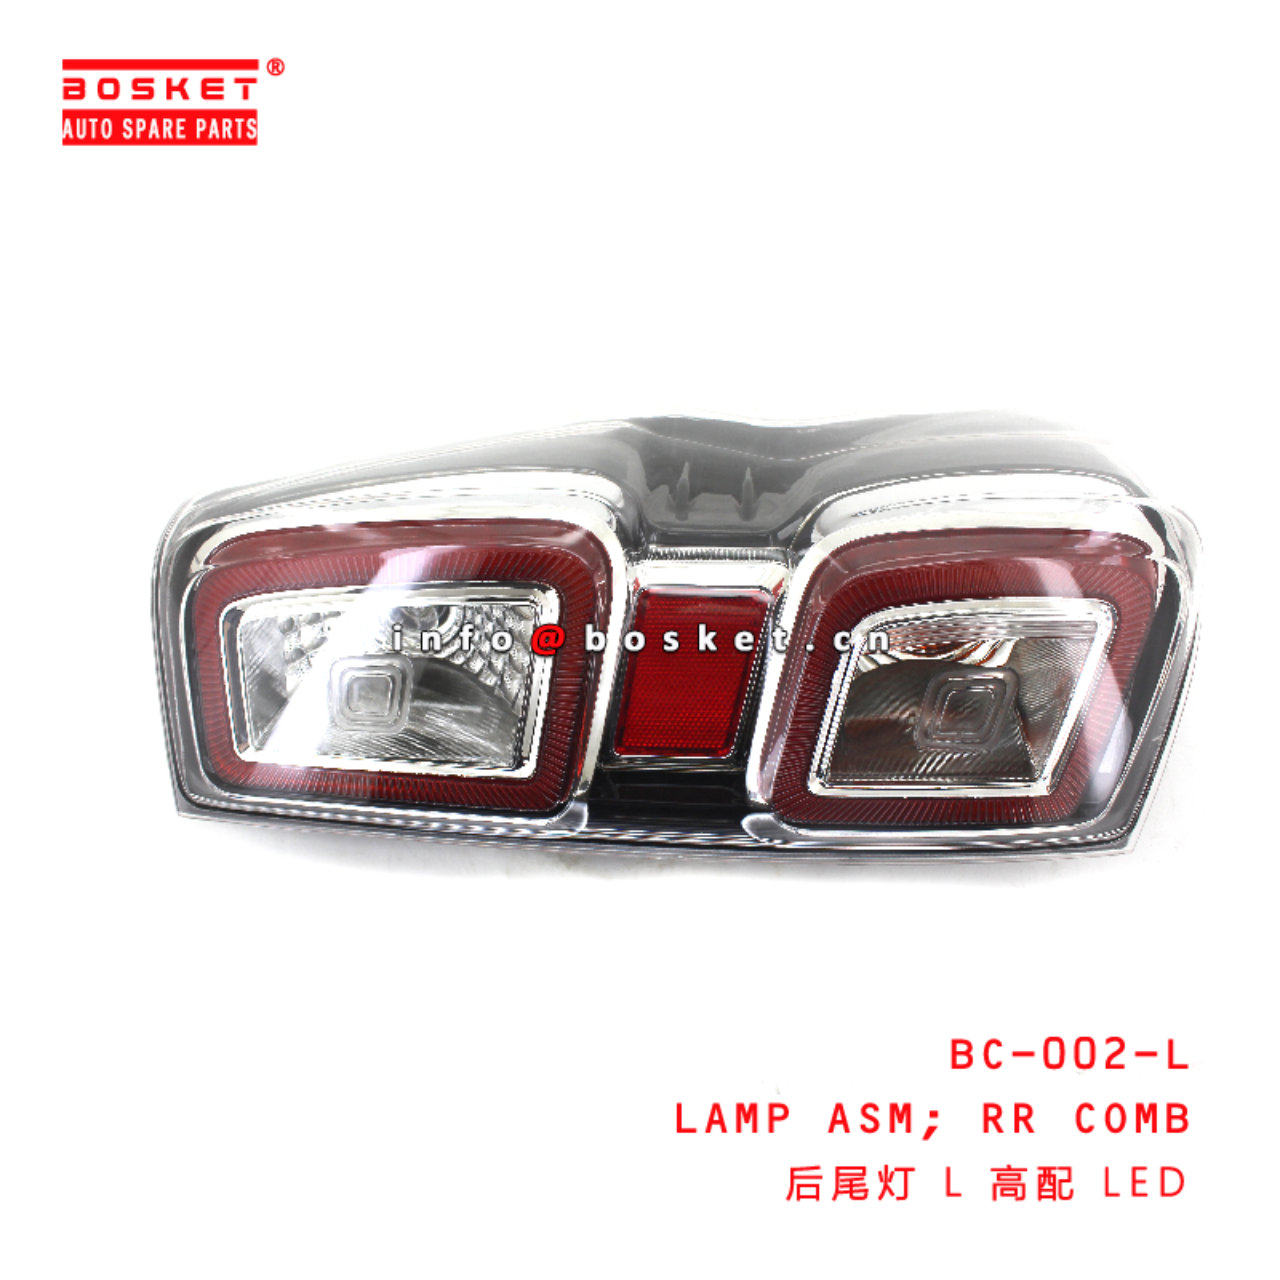 BC-002-L Rear Combination Lamp Assembly suitable for ISUZU DMAX2021  BC-002-L